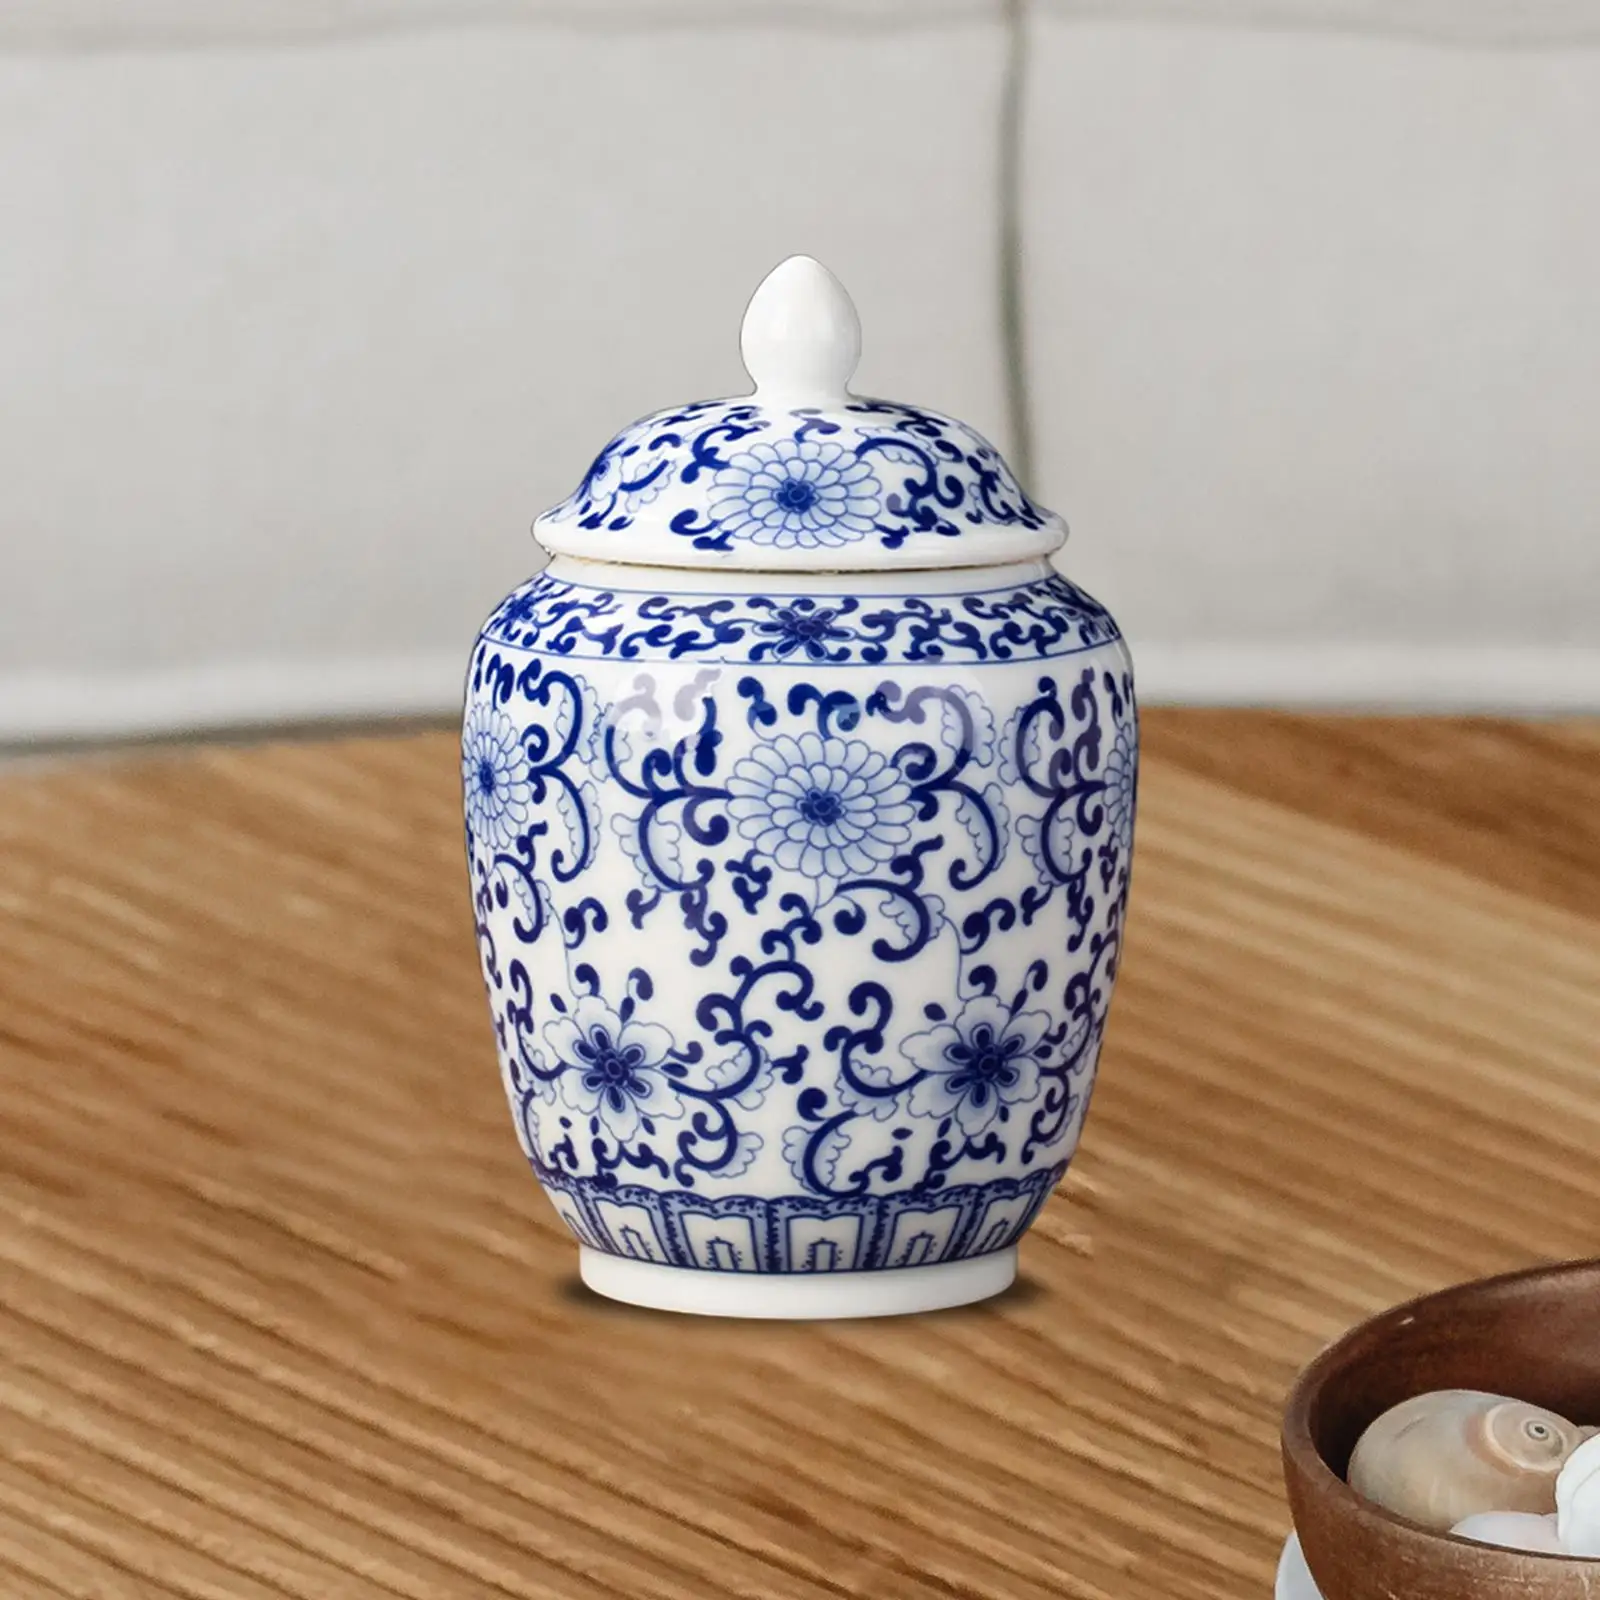 Ceramic Ginger Jar Gift Chinoiserie Traditional Porcelain Jars Vase for Weddings Wedding Countertop Table Decoration Home Decor